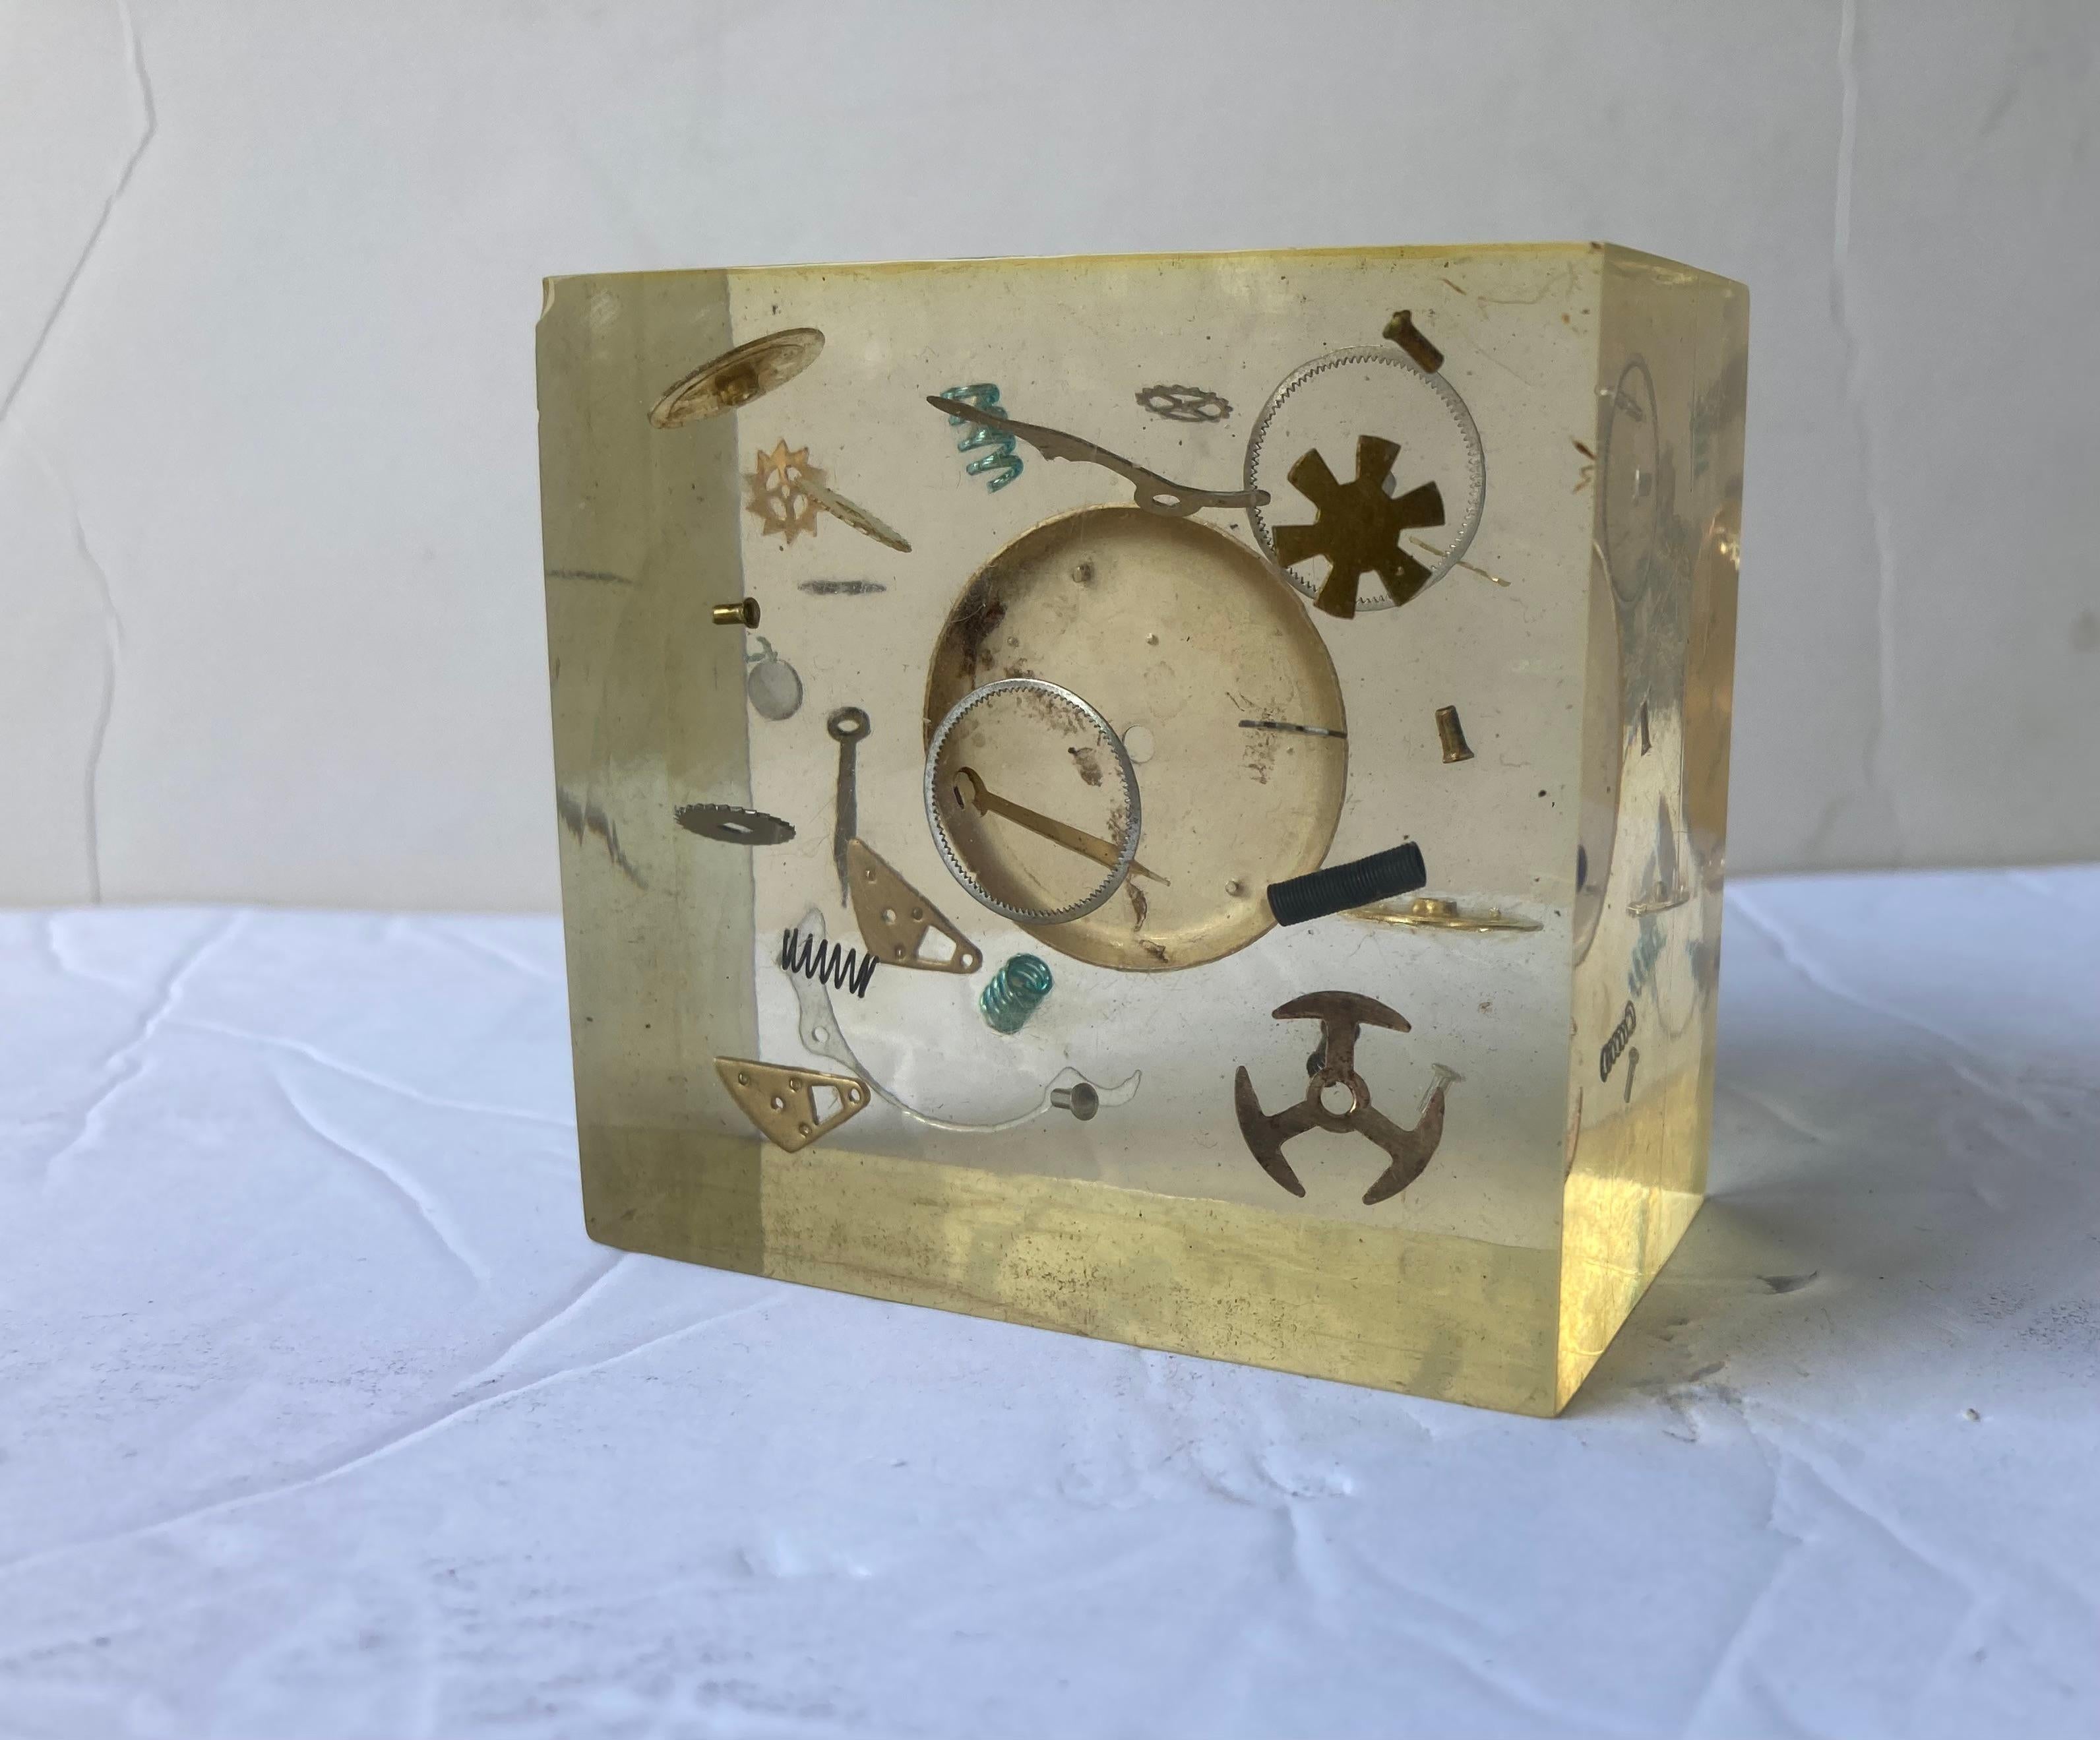 Modern Lucite Resin Sculpture/Paperweight Attb to Pierre Giraudon with Clock Parts For Sale